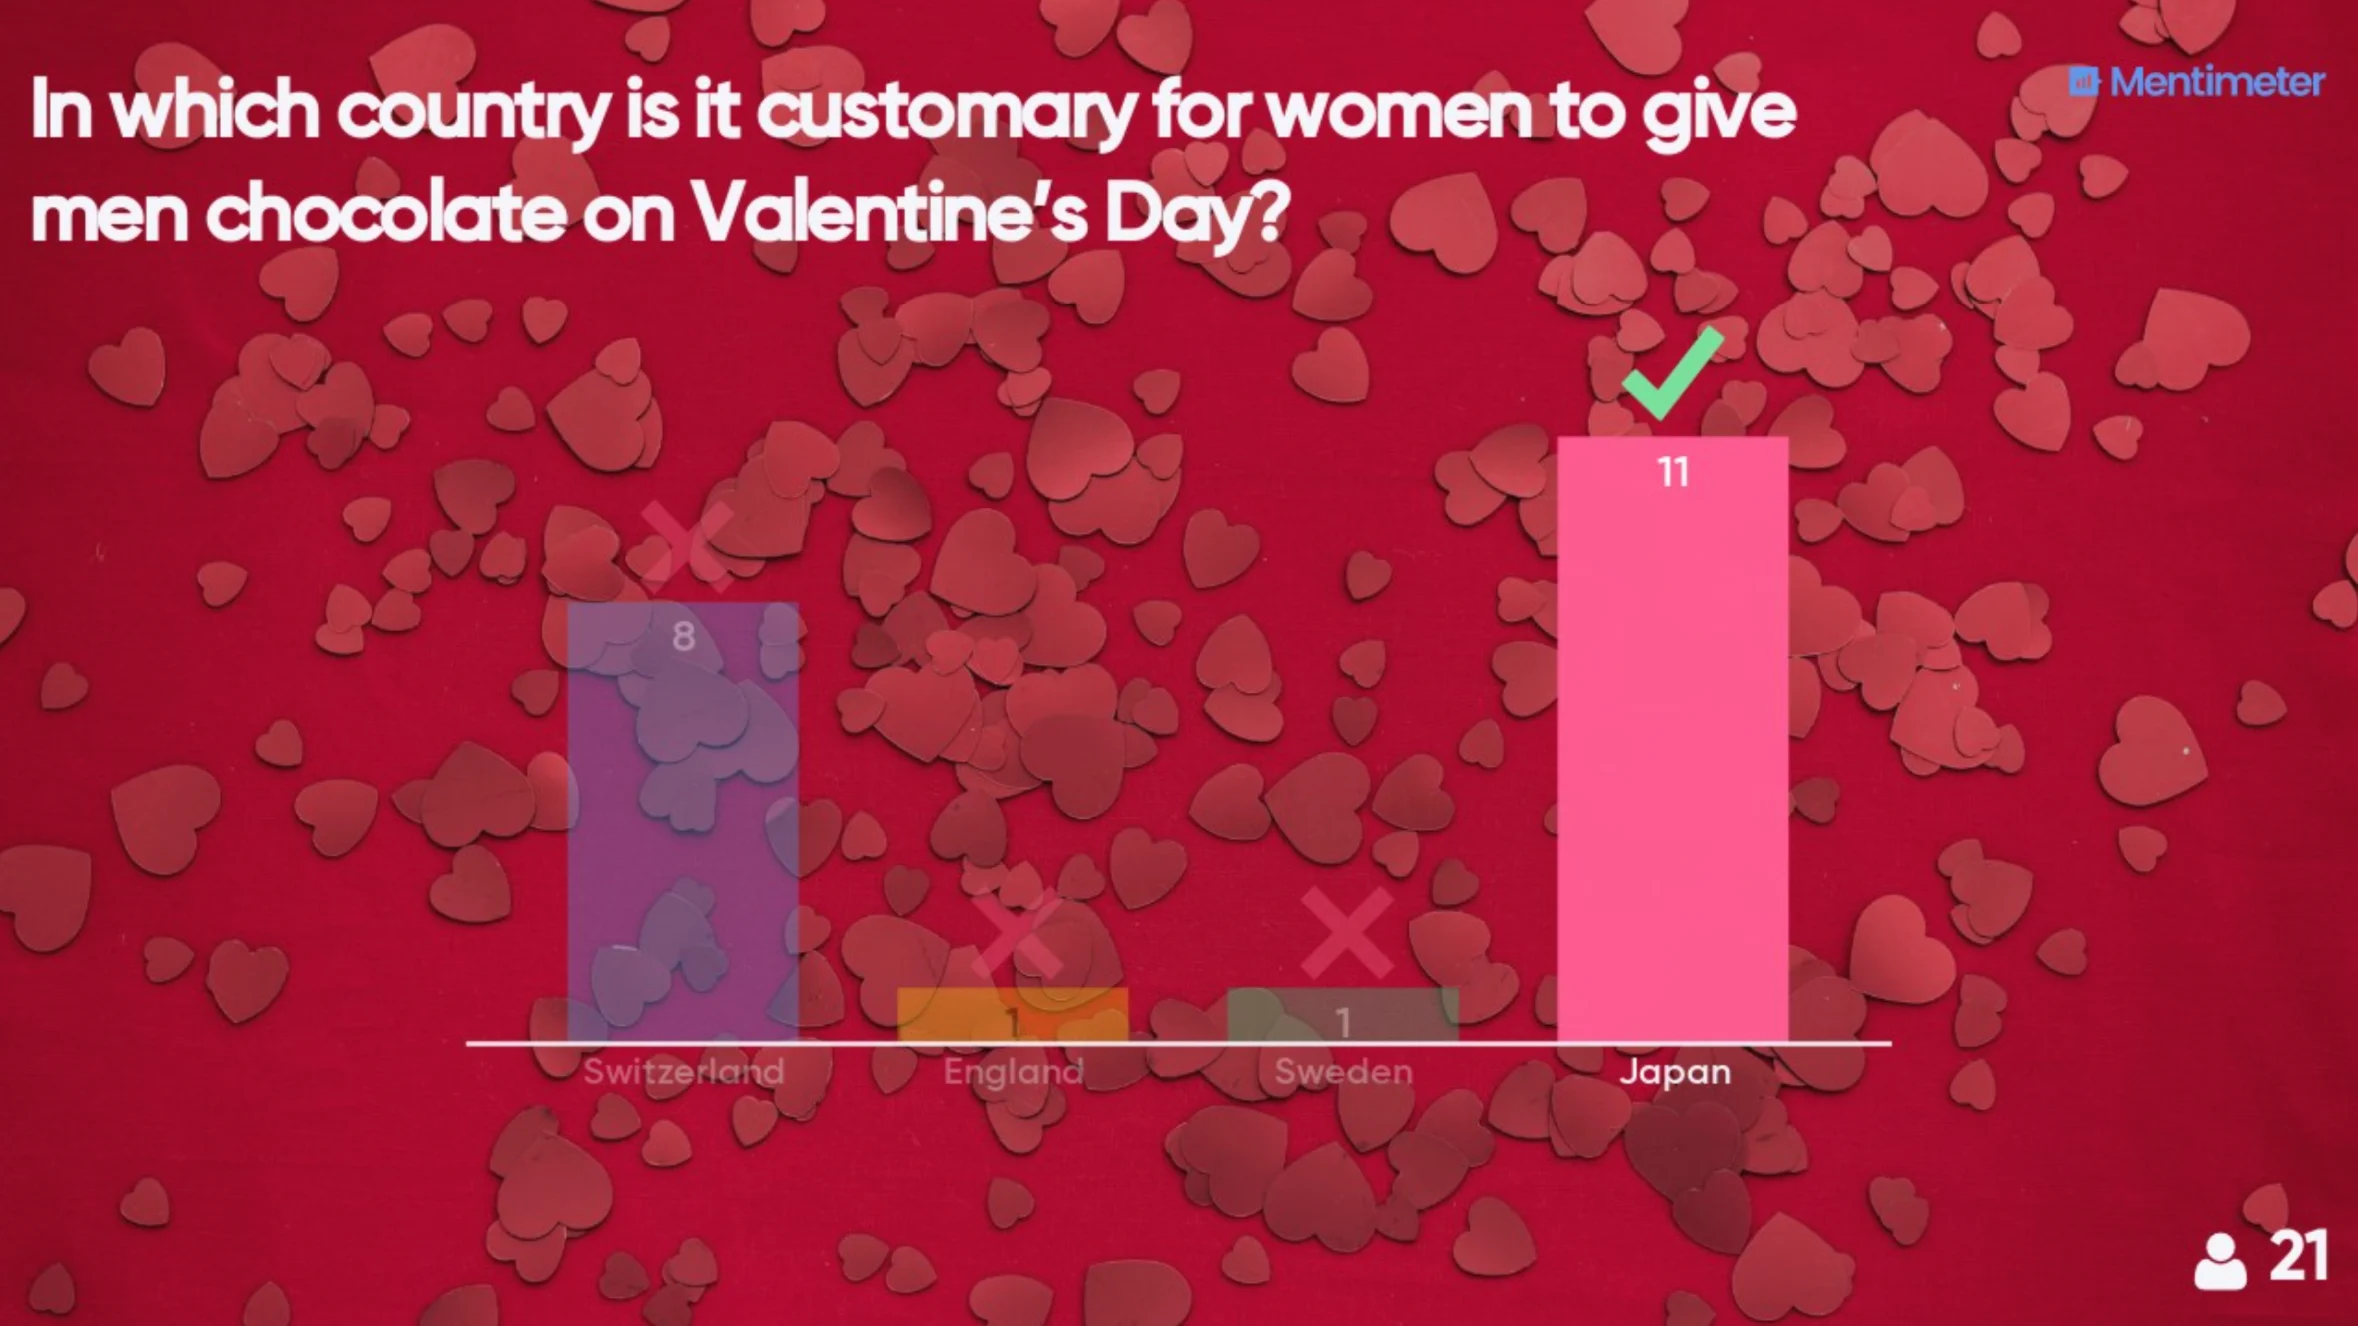 In which country is it customary for women to give men chocolate on Valentine's Day?